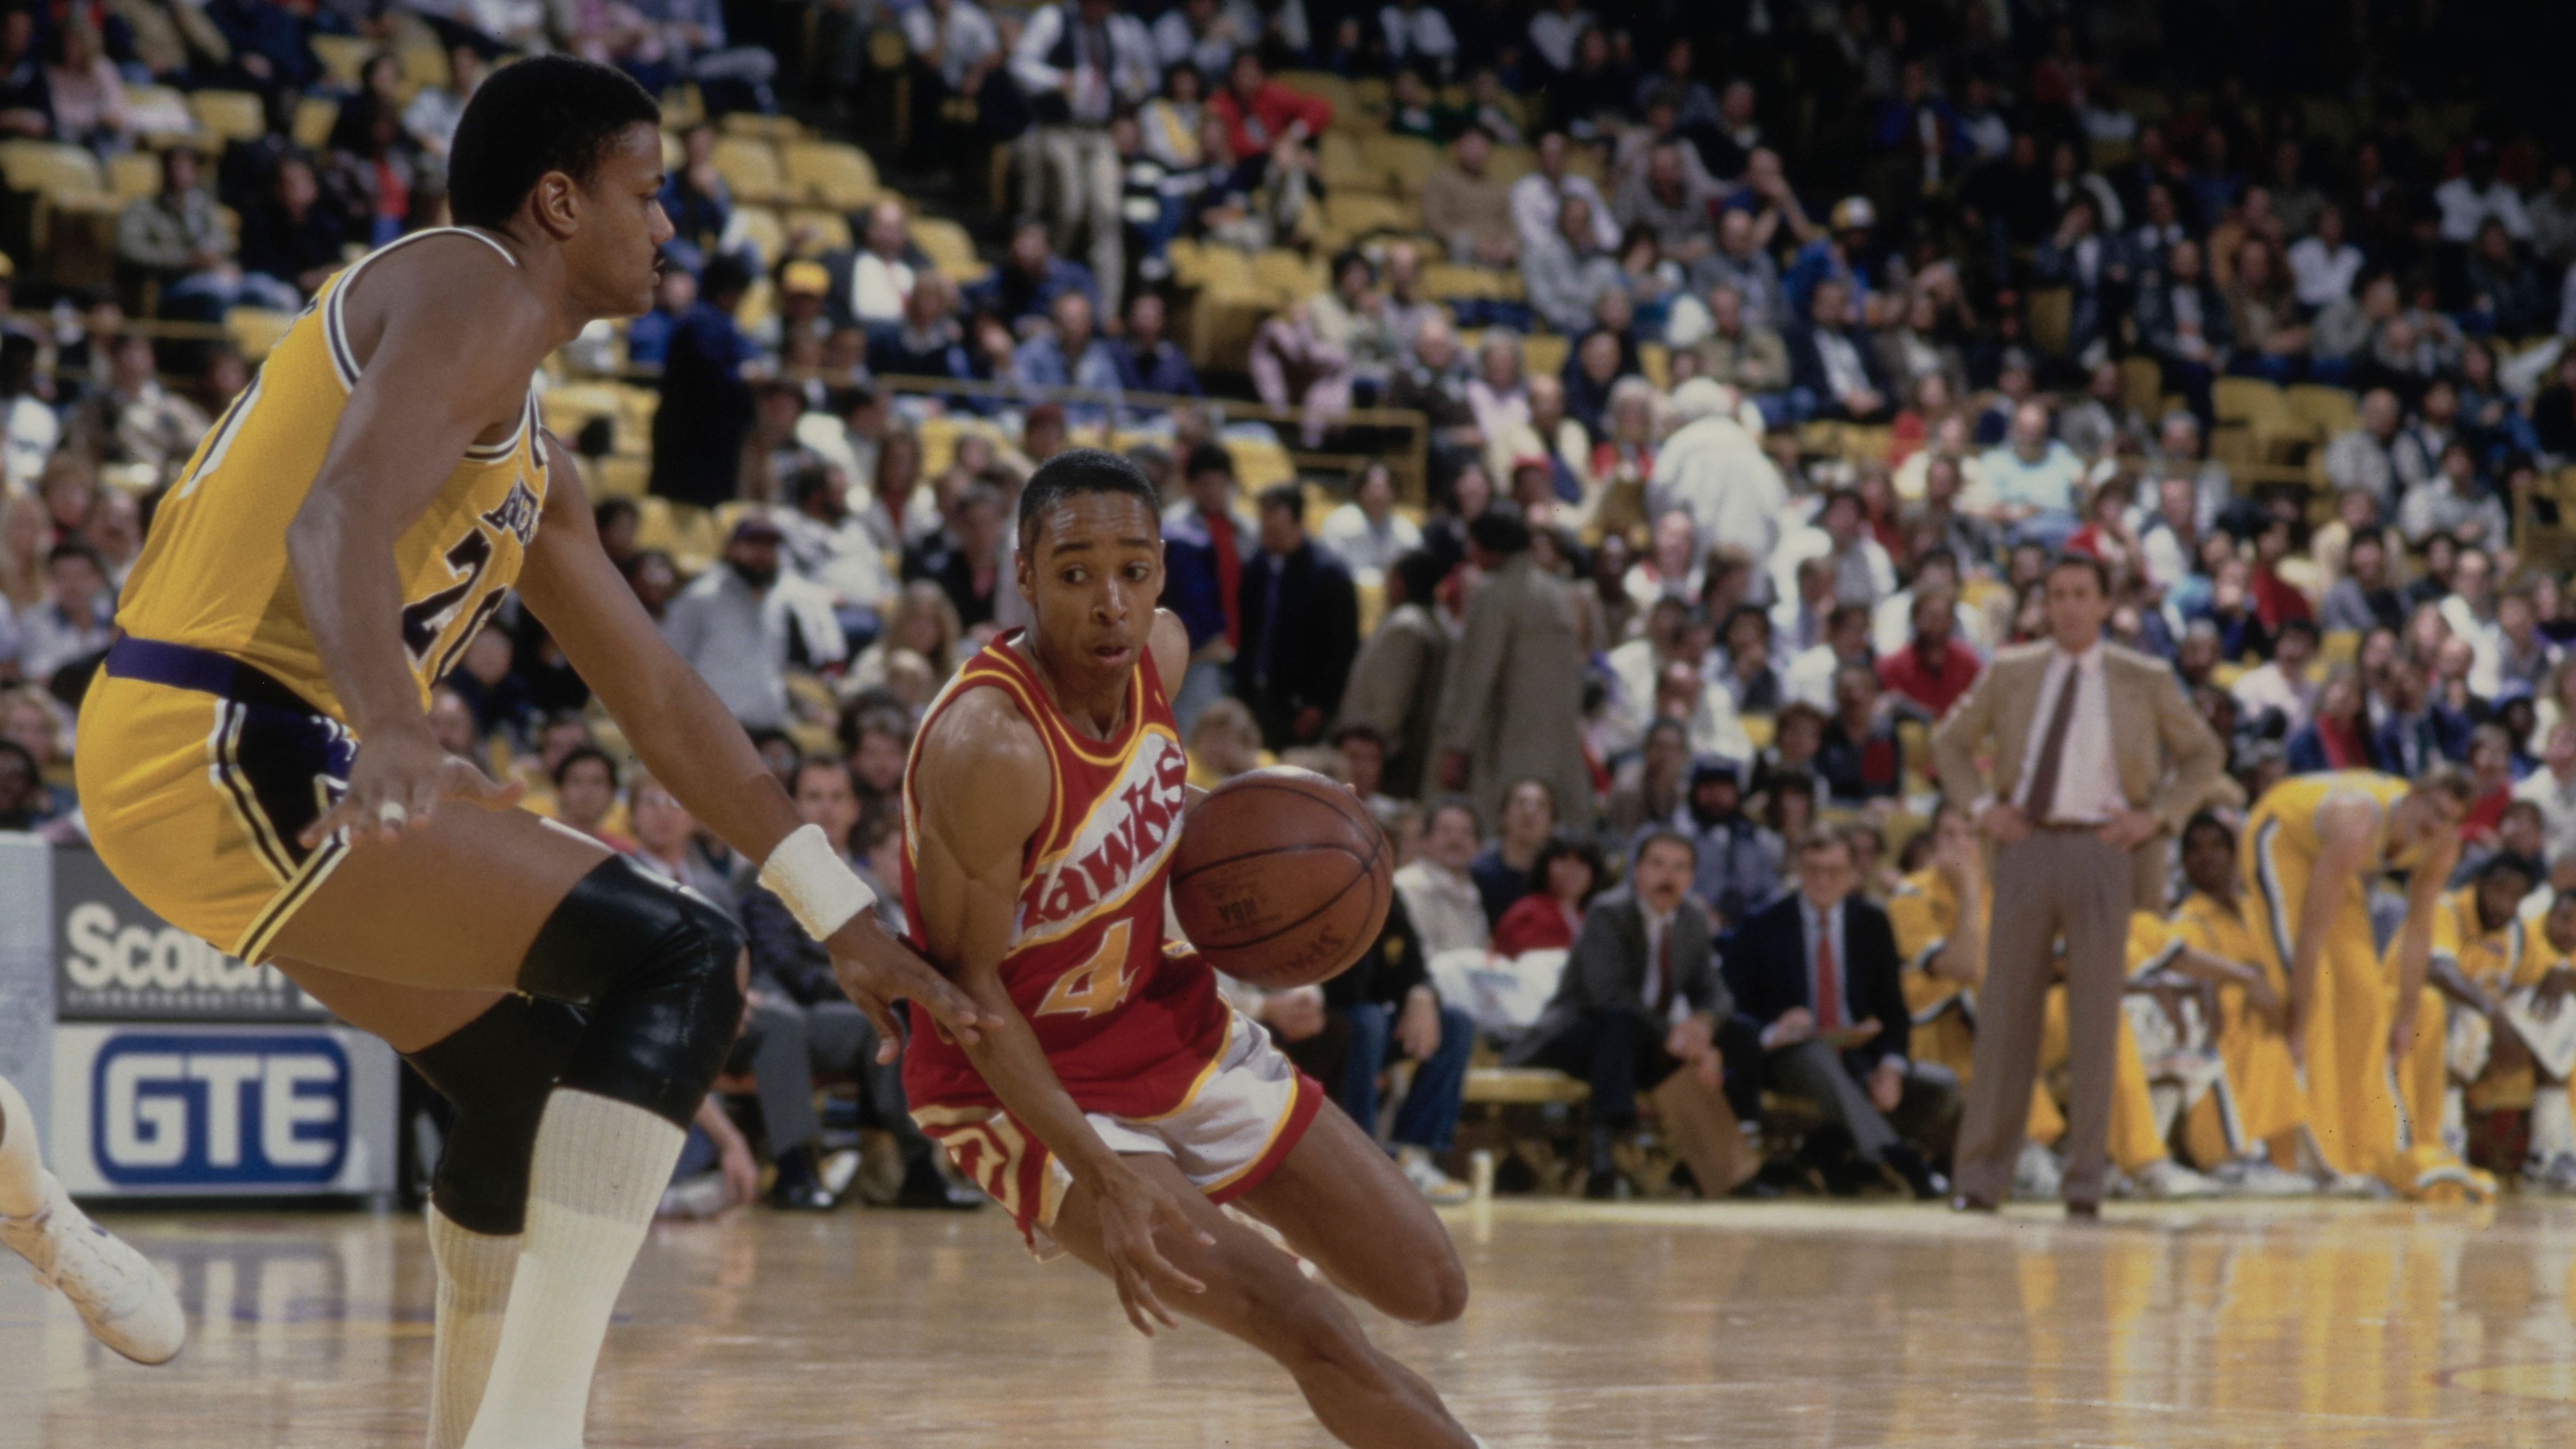 <strong>Spud Webb - 1,68m</strong><br><strong>Teams:</strong> Atlanta Hawks, Sacramento Kings, Minnesota Timberwolves, Orlando Magic<br><strong>Karriere-Stats:</strong> 9,9 Punkte, 2,1 Rebounds, 5,3 Assists<br><strong>Auszeichnungen:</strong> 1x Slam-Dunk-Contest-Champion